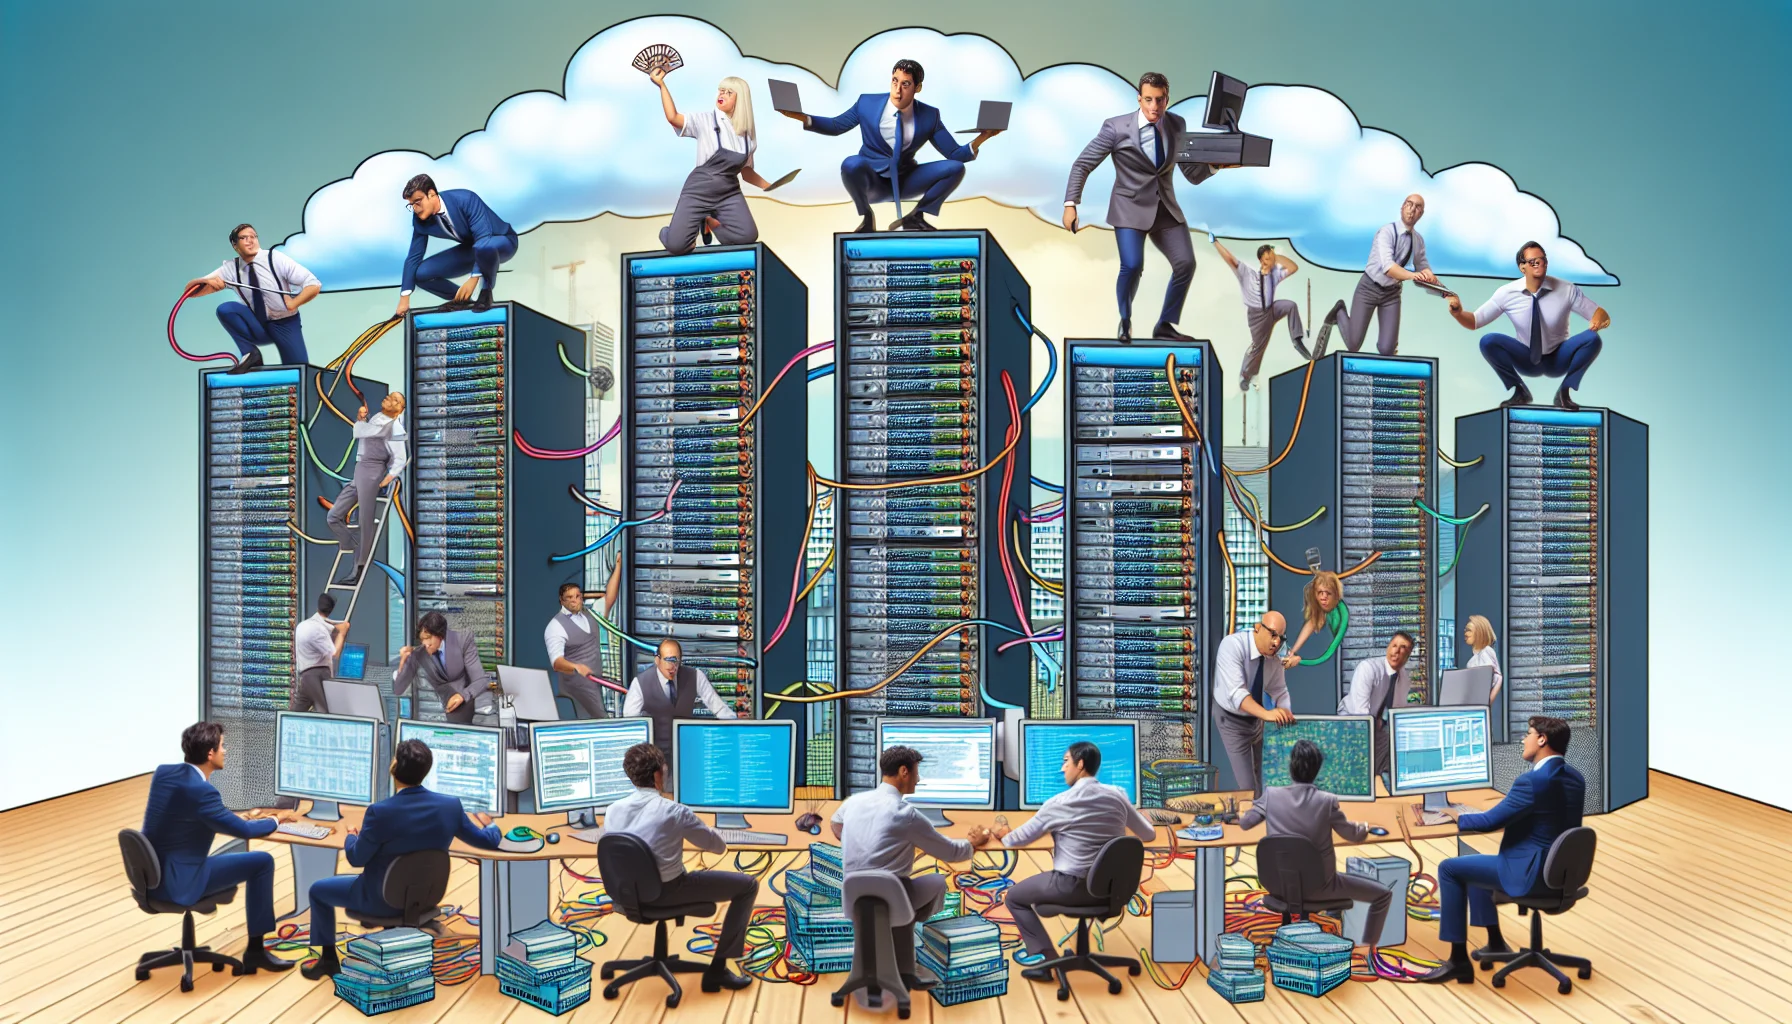 Create a humorous and enticing image depicting the concept of inexpensive dedicated server hosting. Set the scene in a whimsical office space where the servers are personified as hardworking people from a variety of descents including Caucasian, Asian, and Hispanic, diligently keeping up with the online traffic. The servers are manifested as towering figures showing the importance and capability of a dedicated hosting server. They are shown managing multiple tasks, like juggling web traffic and batting away cyber threats, all while multitasking effectively. Some of them are displaying amusingly exaggerated expressions of determination and concentration. The backdrop includes laughably oversized Ethernet cables and oversized, colorful network diagrams.